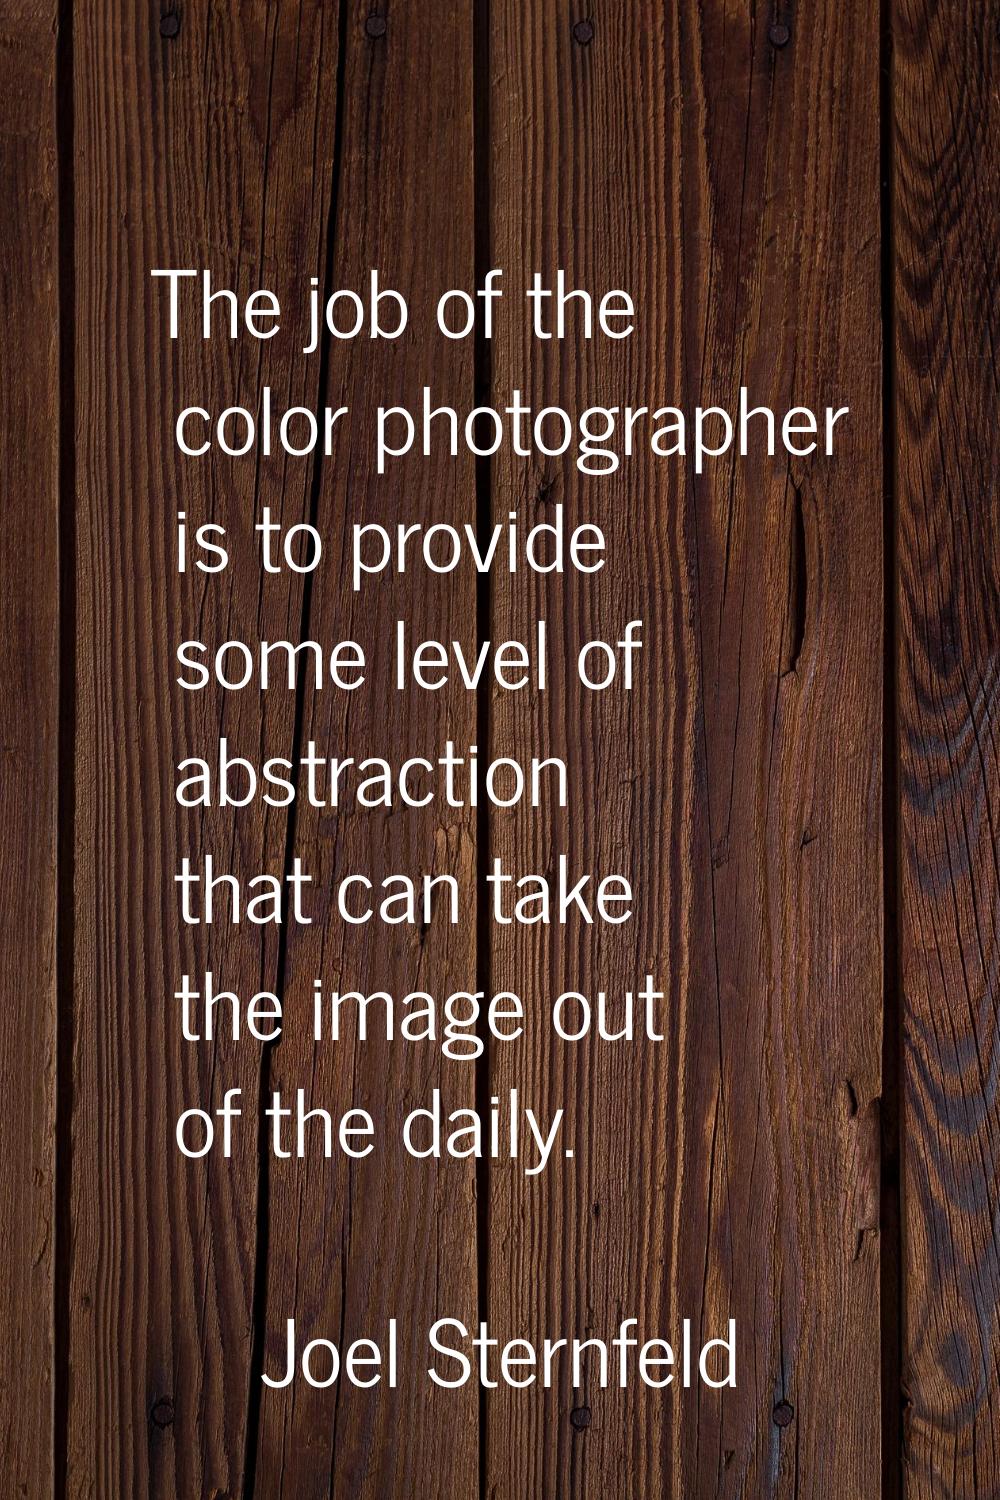 The job of the color photographer is to provide some level of abstraction that can take the image o